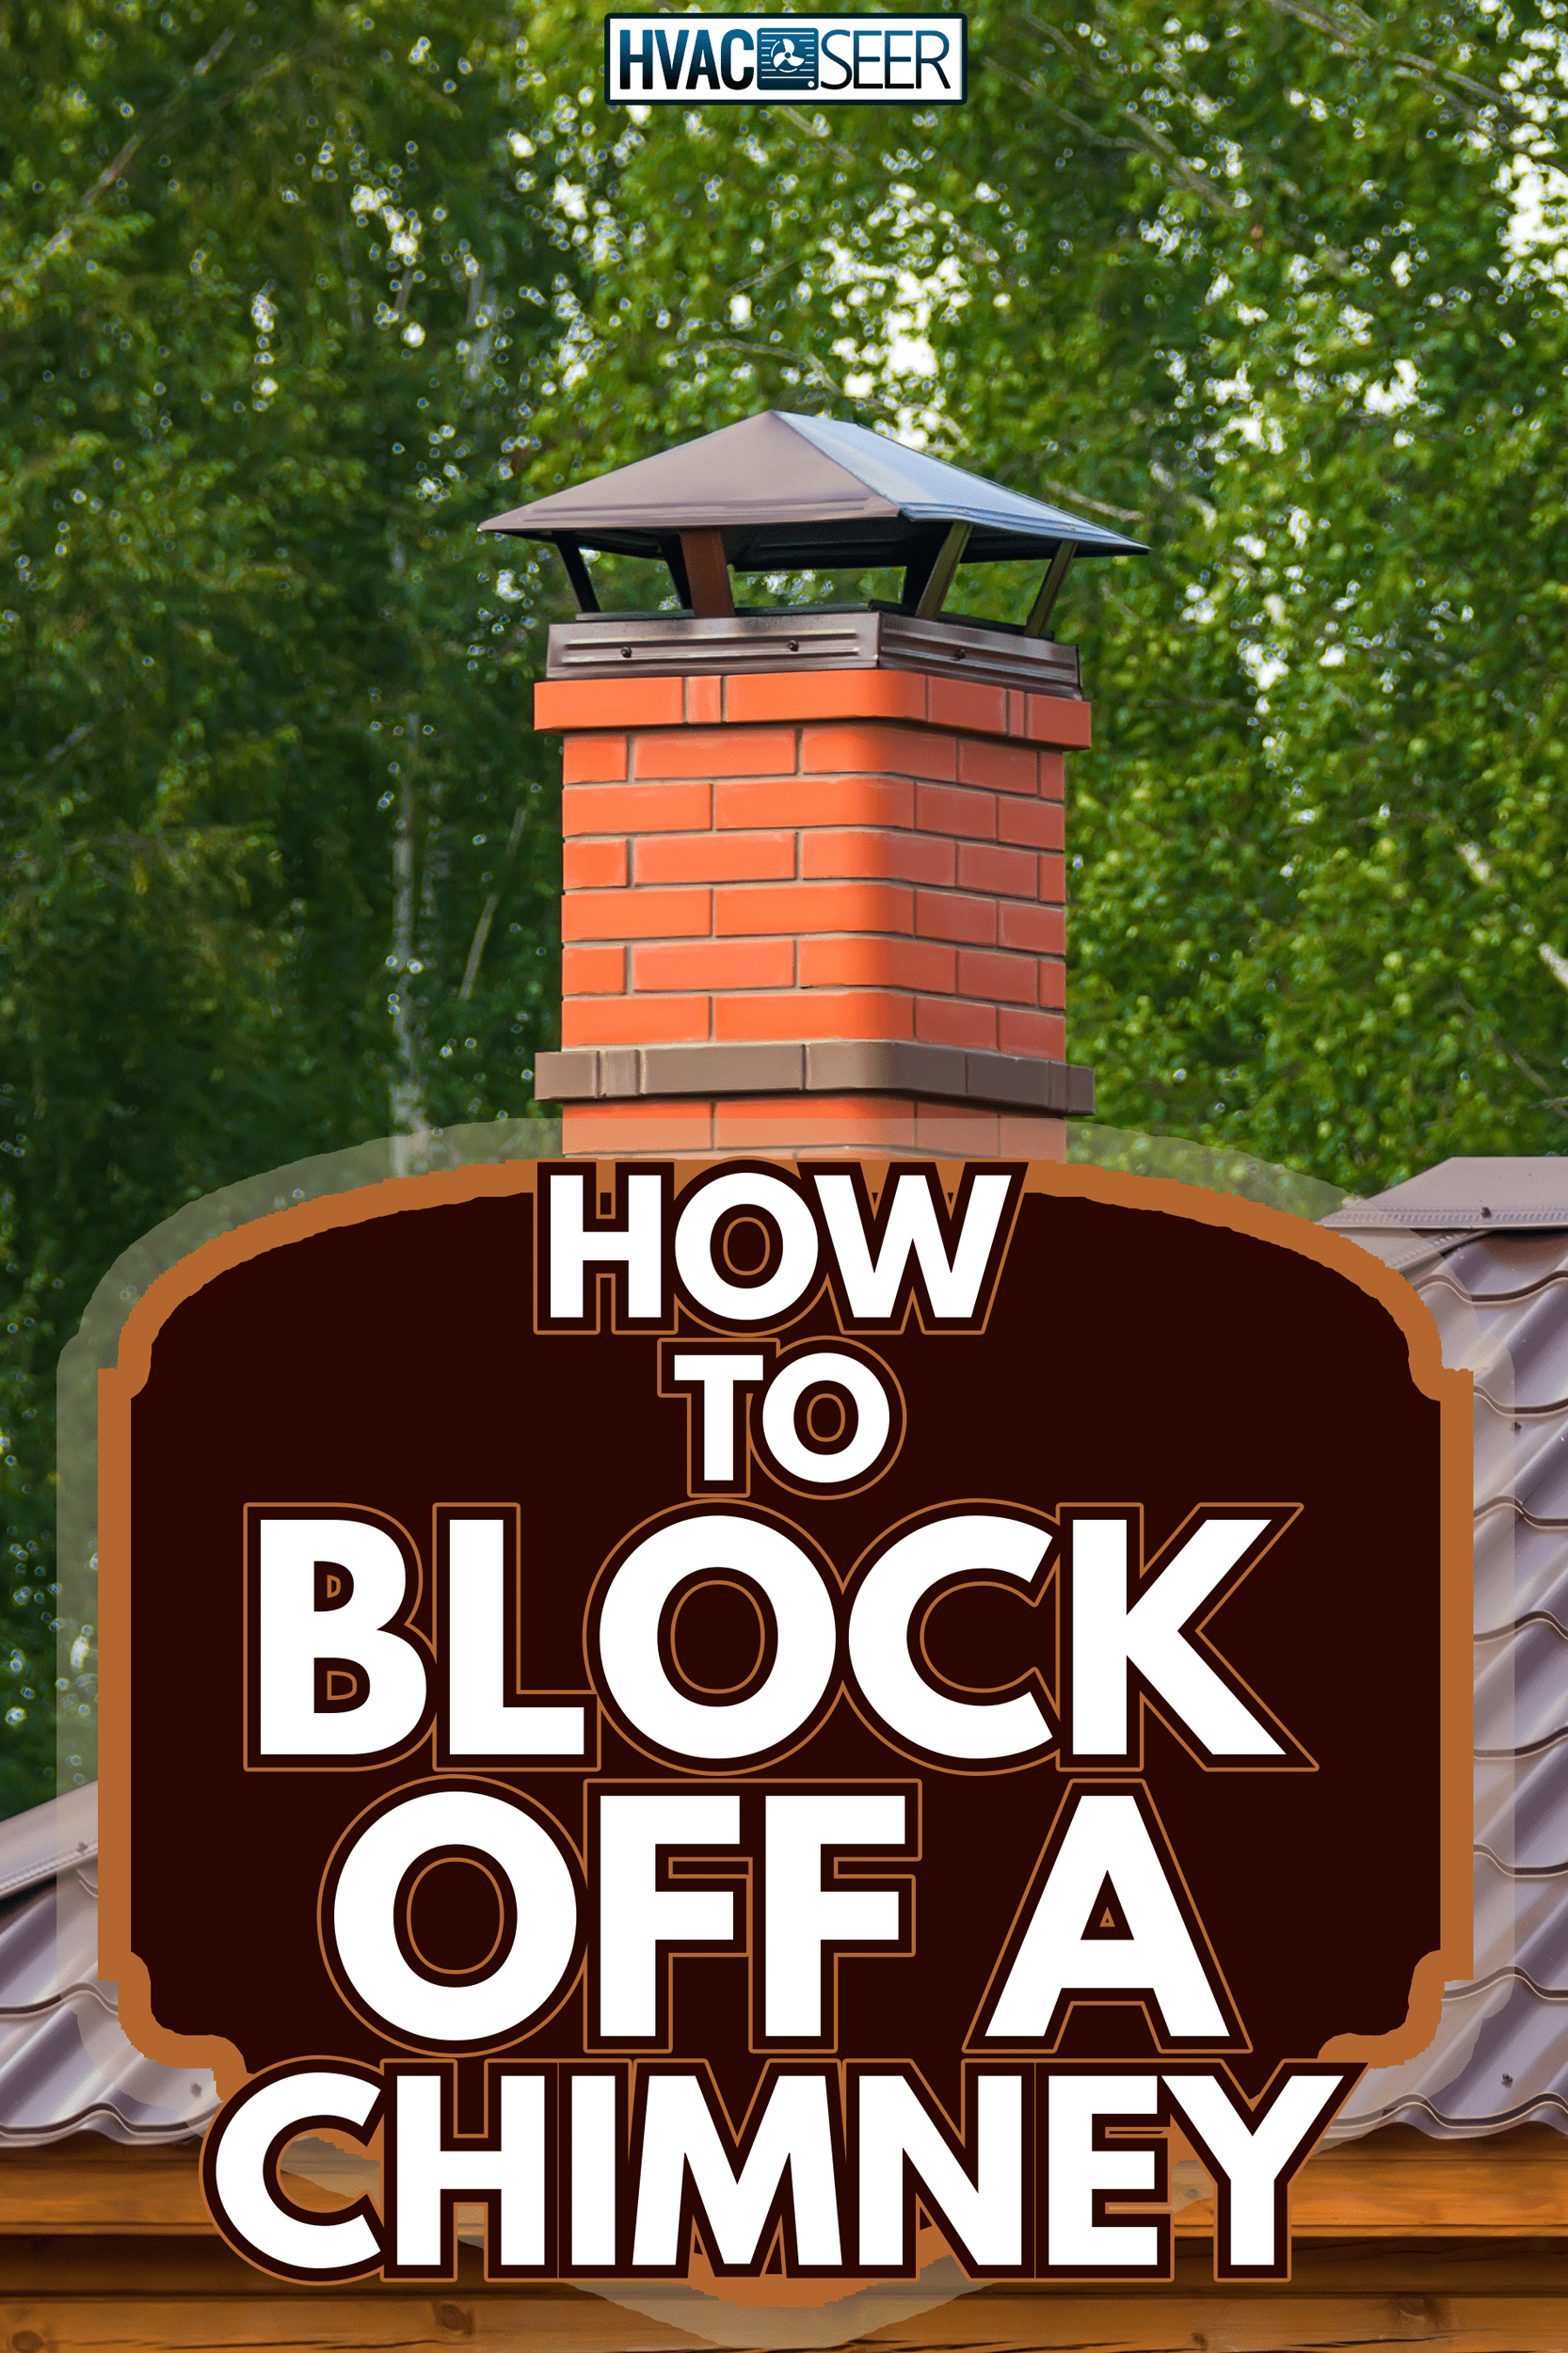 Chimney on roof of country house - How to Block Off a Chimney